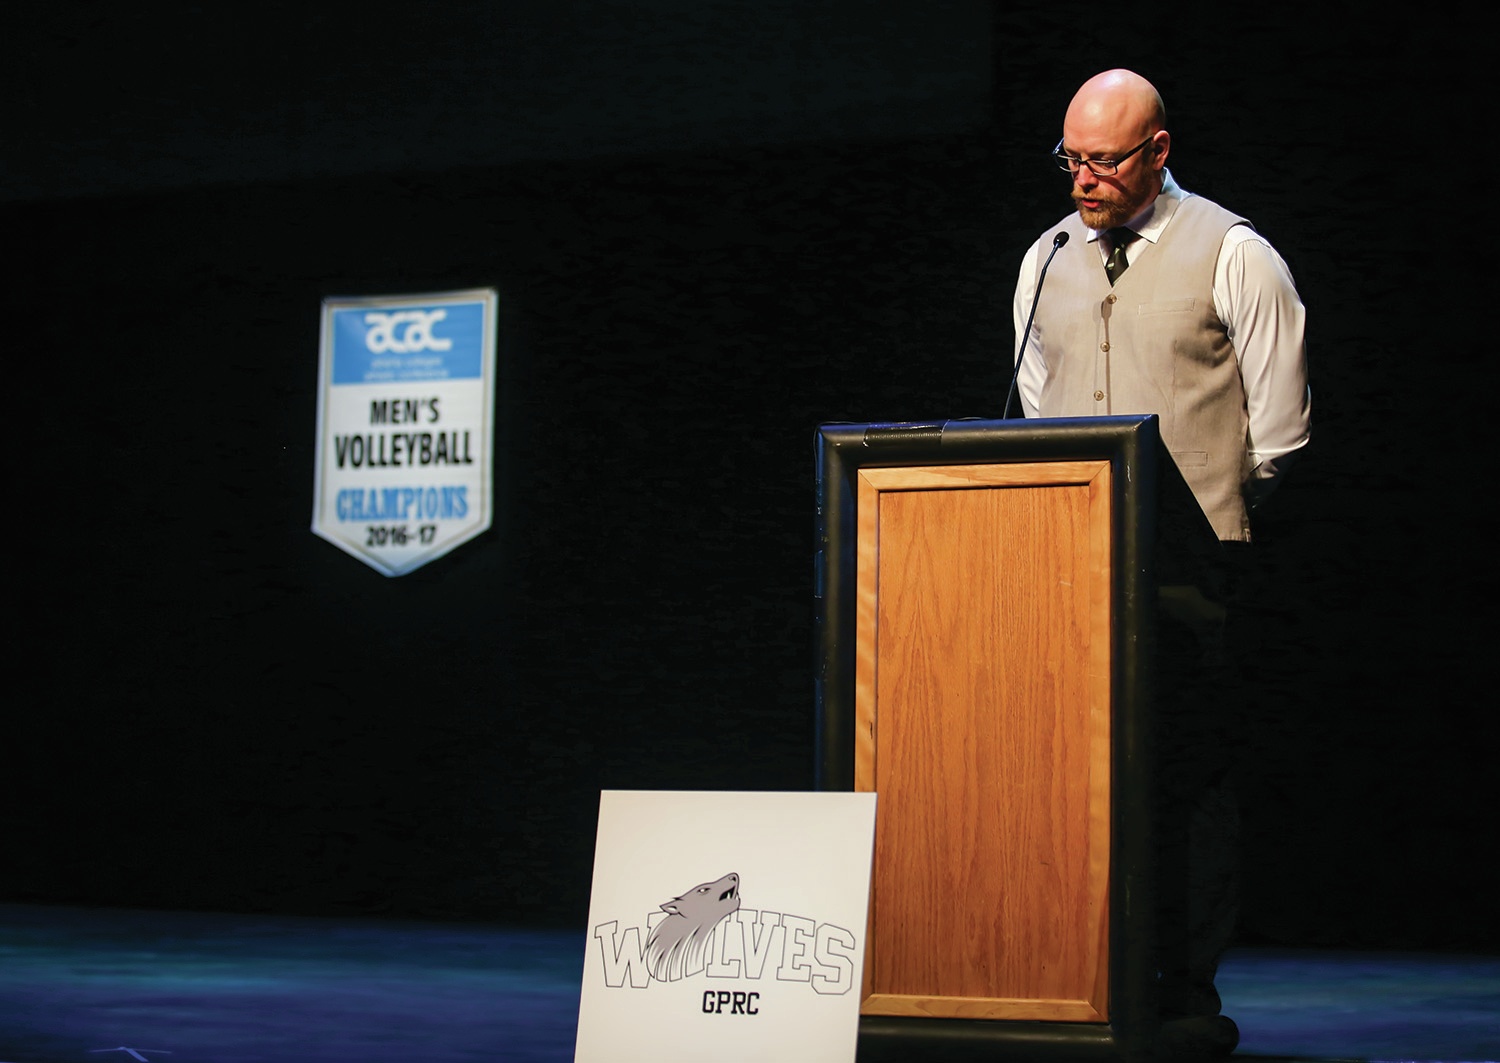 GEARING UP - Emcee PJ Swales announced the names of the ACAC South All-Conference team during the ACAC Men’s Volleyball awards presentations at the Arts Centre on Wednesday morning. The RDC Kings are set to host the annual provincial championships this weekend.